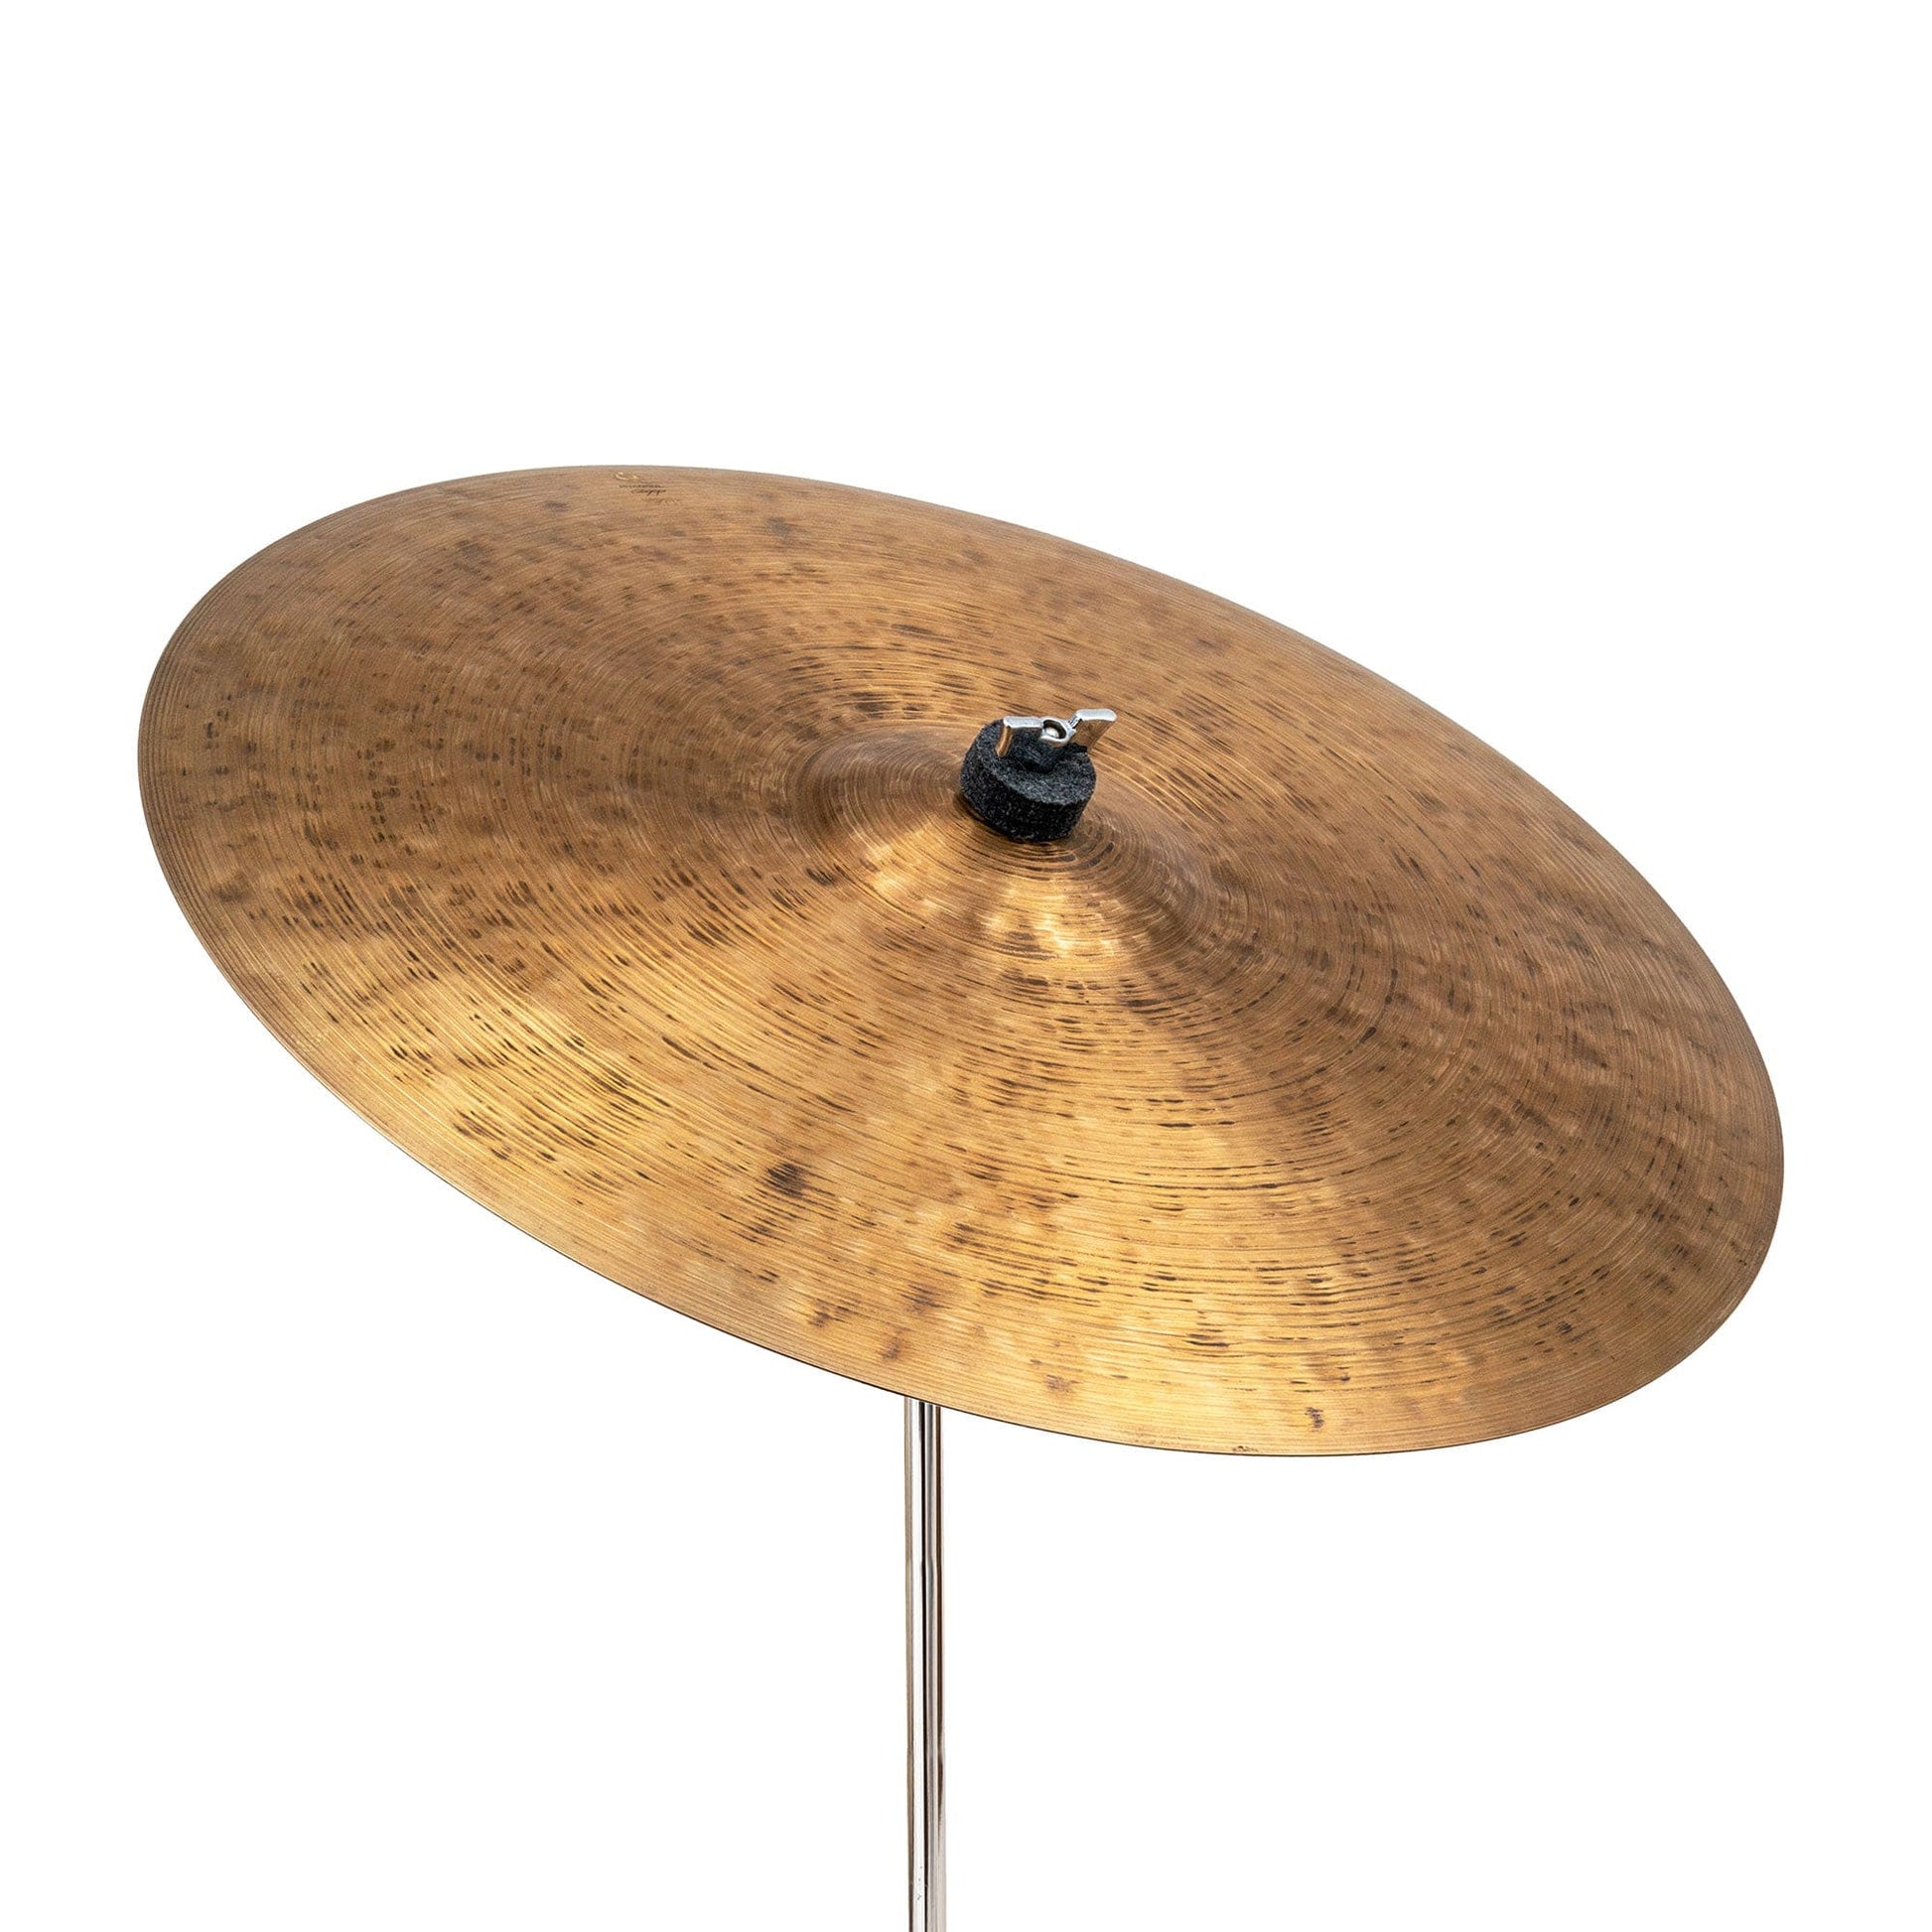 Istanbul Agop 30th Anniversary 22" Medium Ride Drums and Percussion / Cymbals / Ride